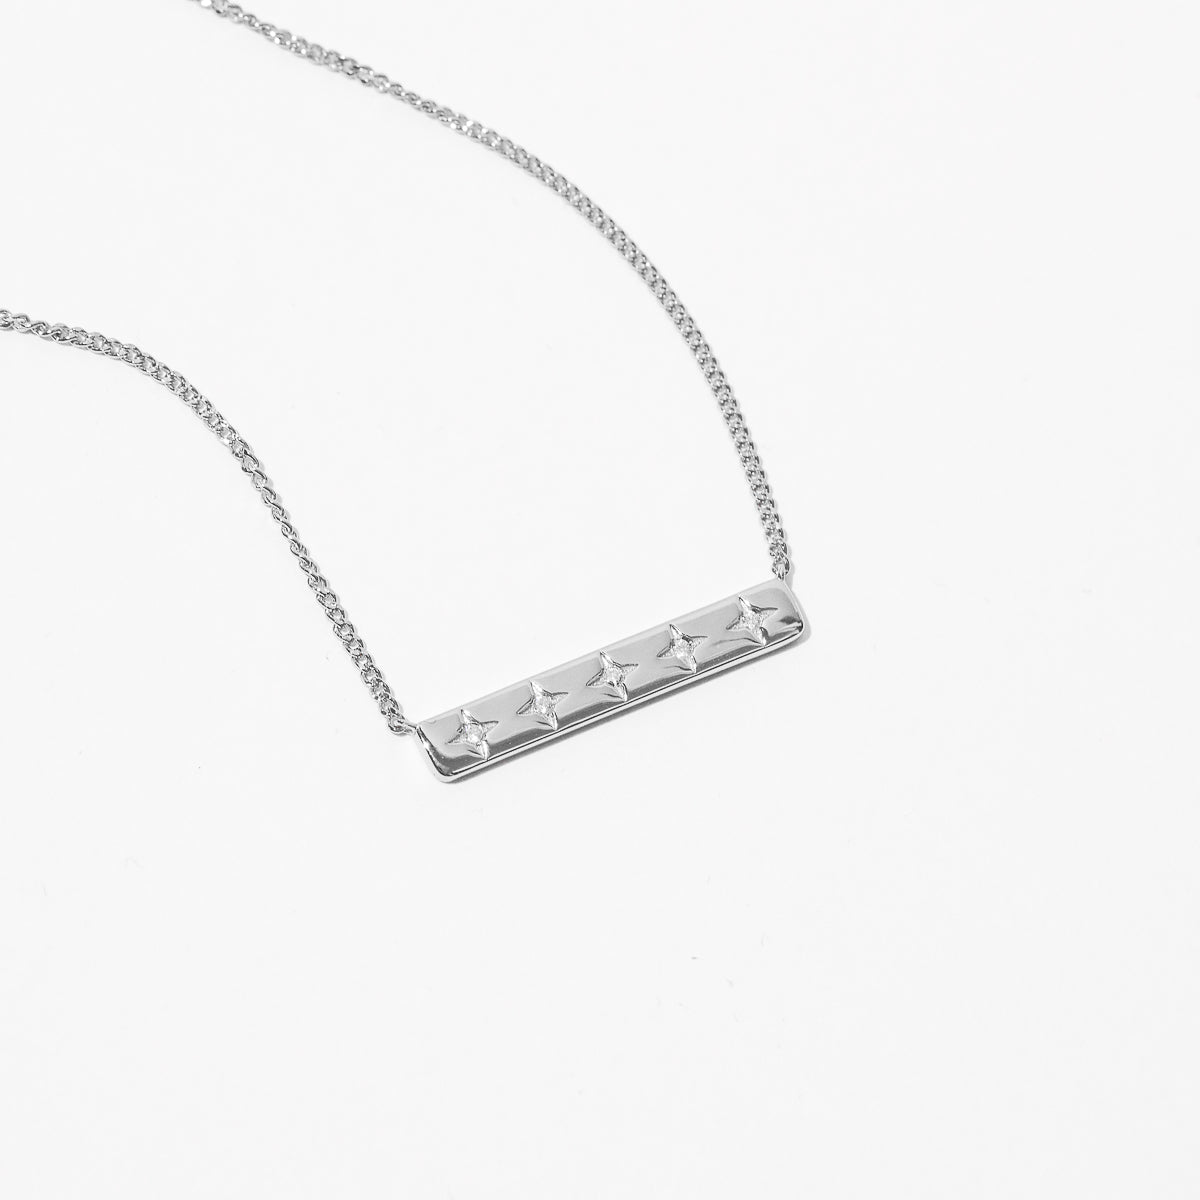 Cosmic Star Bar Necklace in Silver flat lay shot